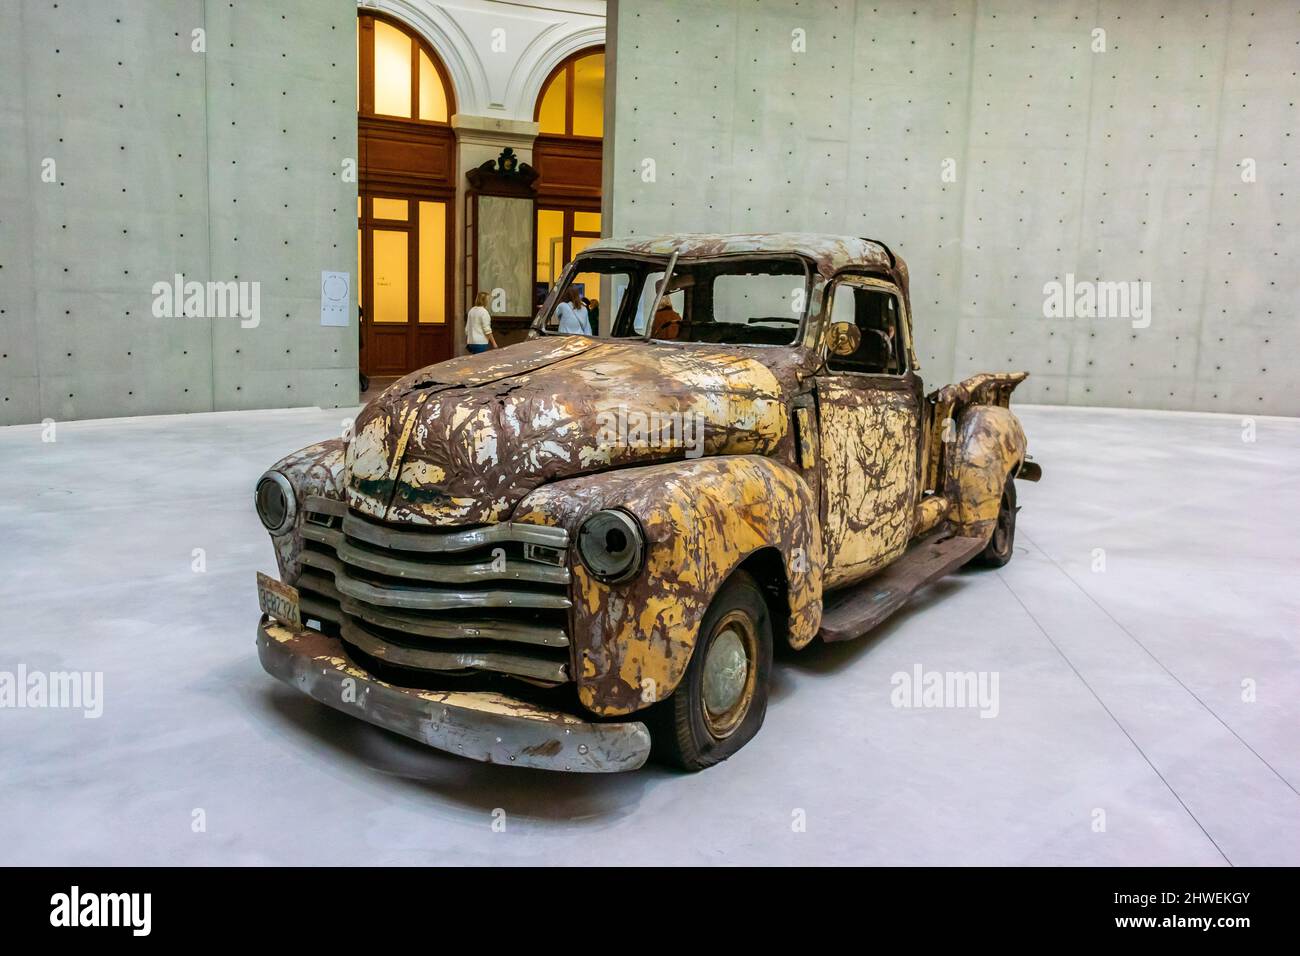 Paris, France, Modern Art Sculpture, Old Truck on Display in  New Museum,(Charles Ray)  'Bourse de Commerce, Pinault Collection', Objects Stock Photo